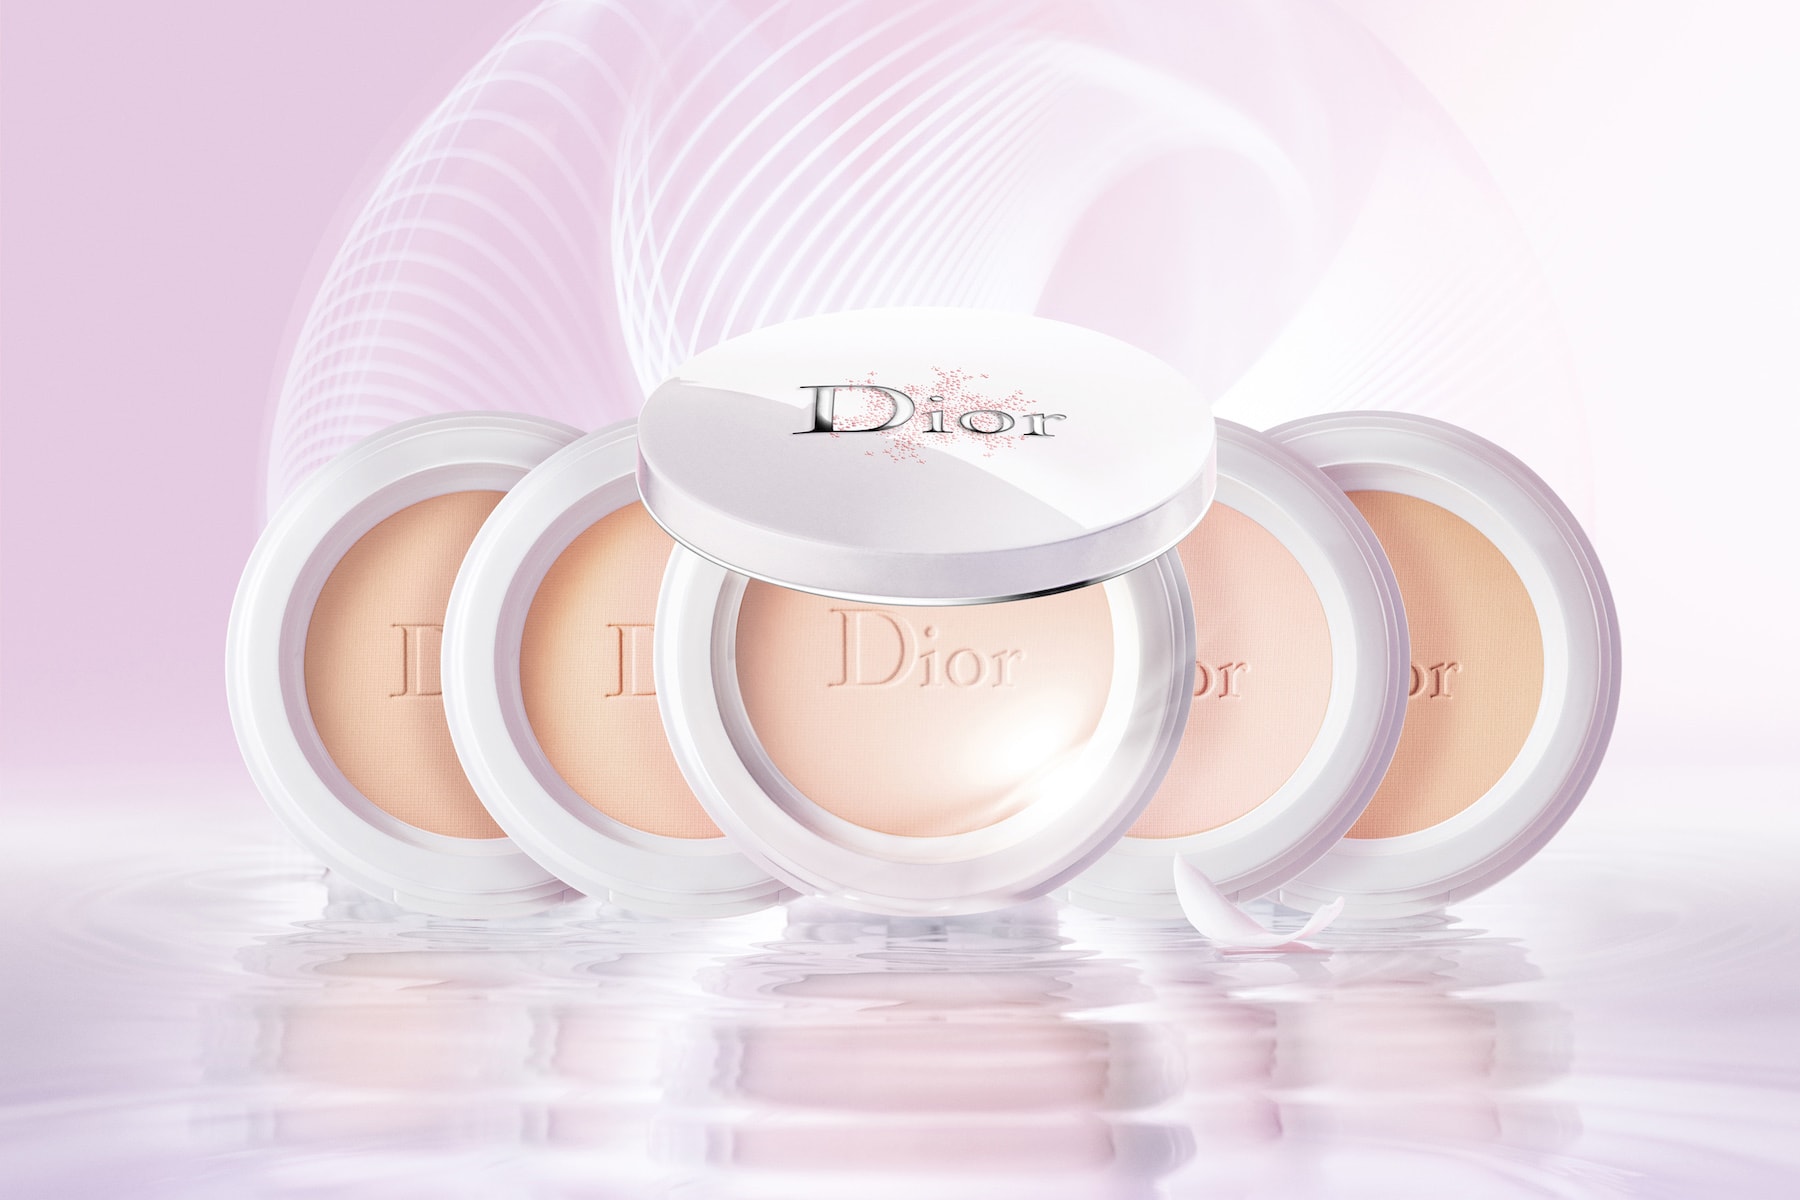 Dior Makeup Diorsnow Beauty Collection Lipgloss Eyeshadow Palette Blush Highlight 